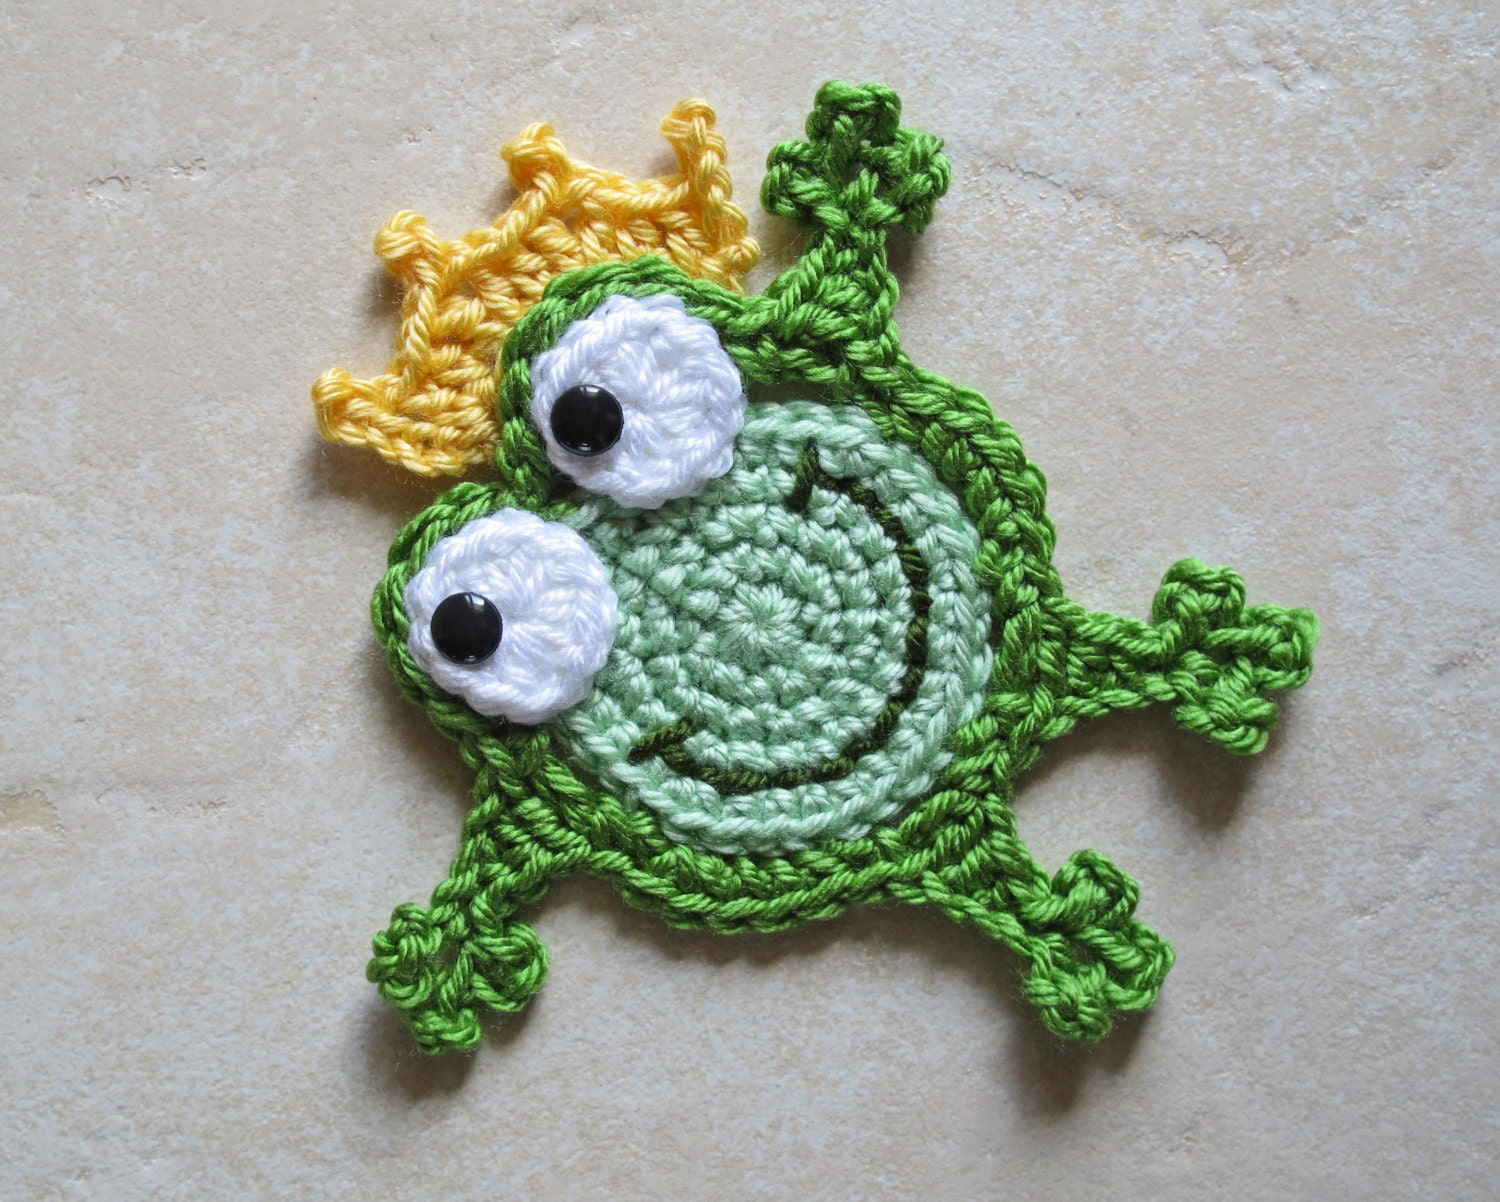 CROCHET PATTERN - Hoppy Frogs - a frog/frog prince/frog with crown applique pattern - Instant PDF Download